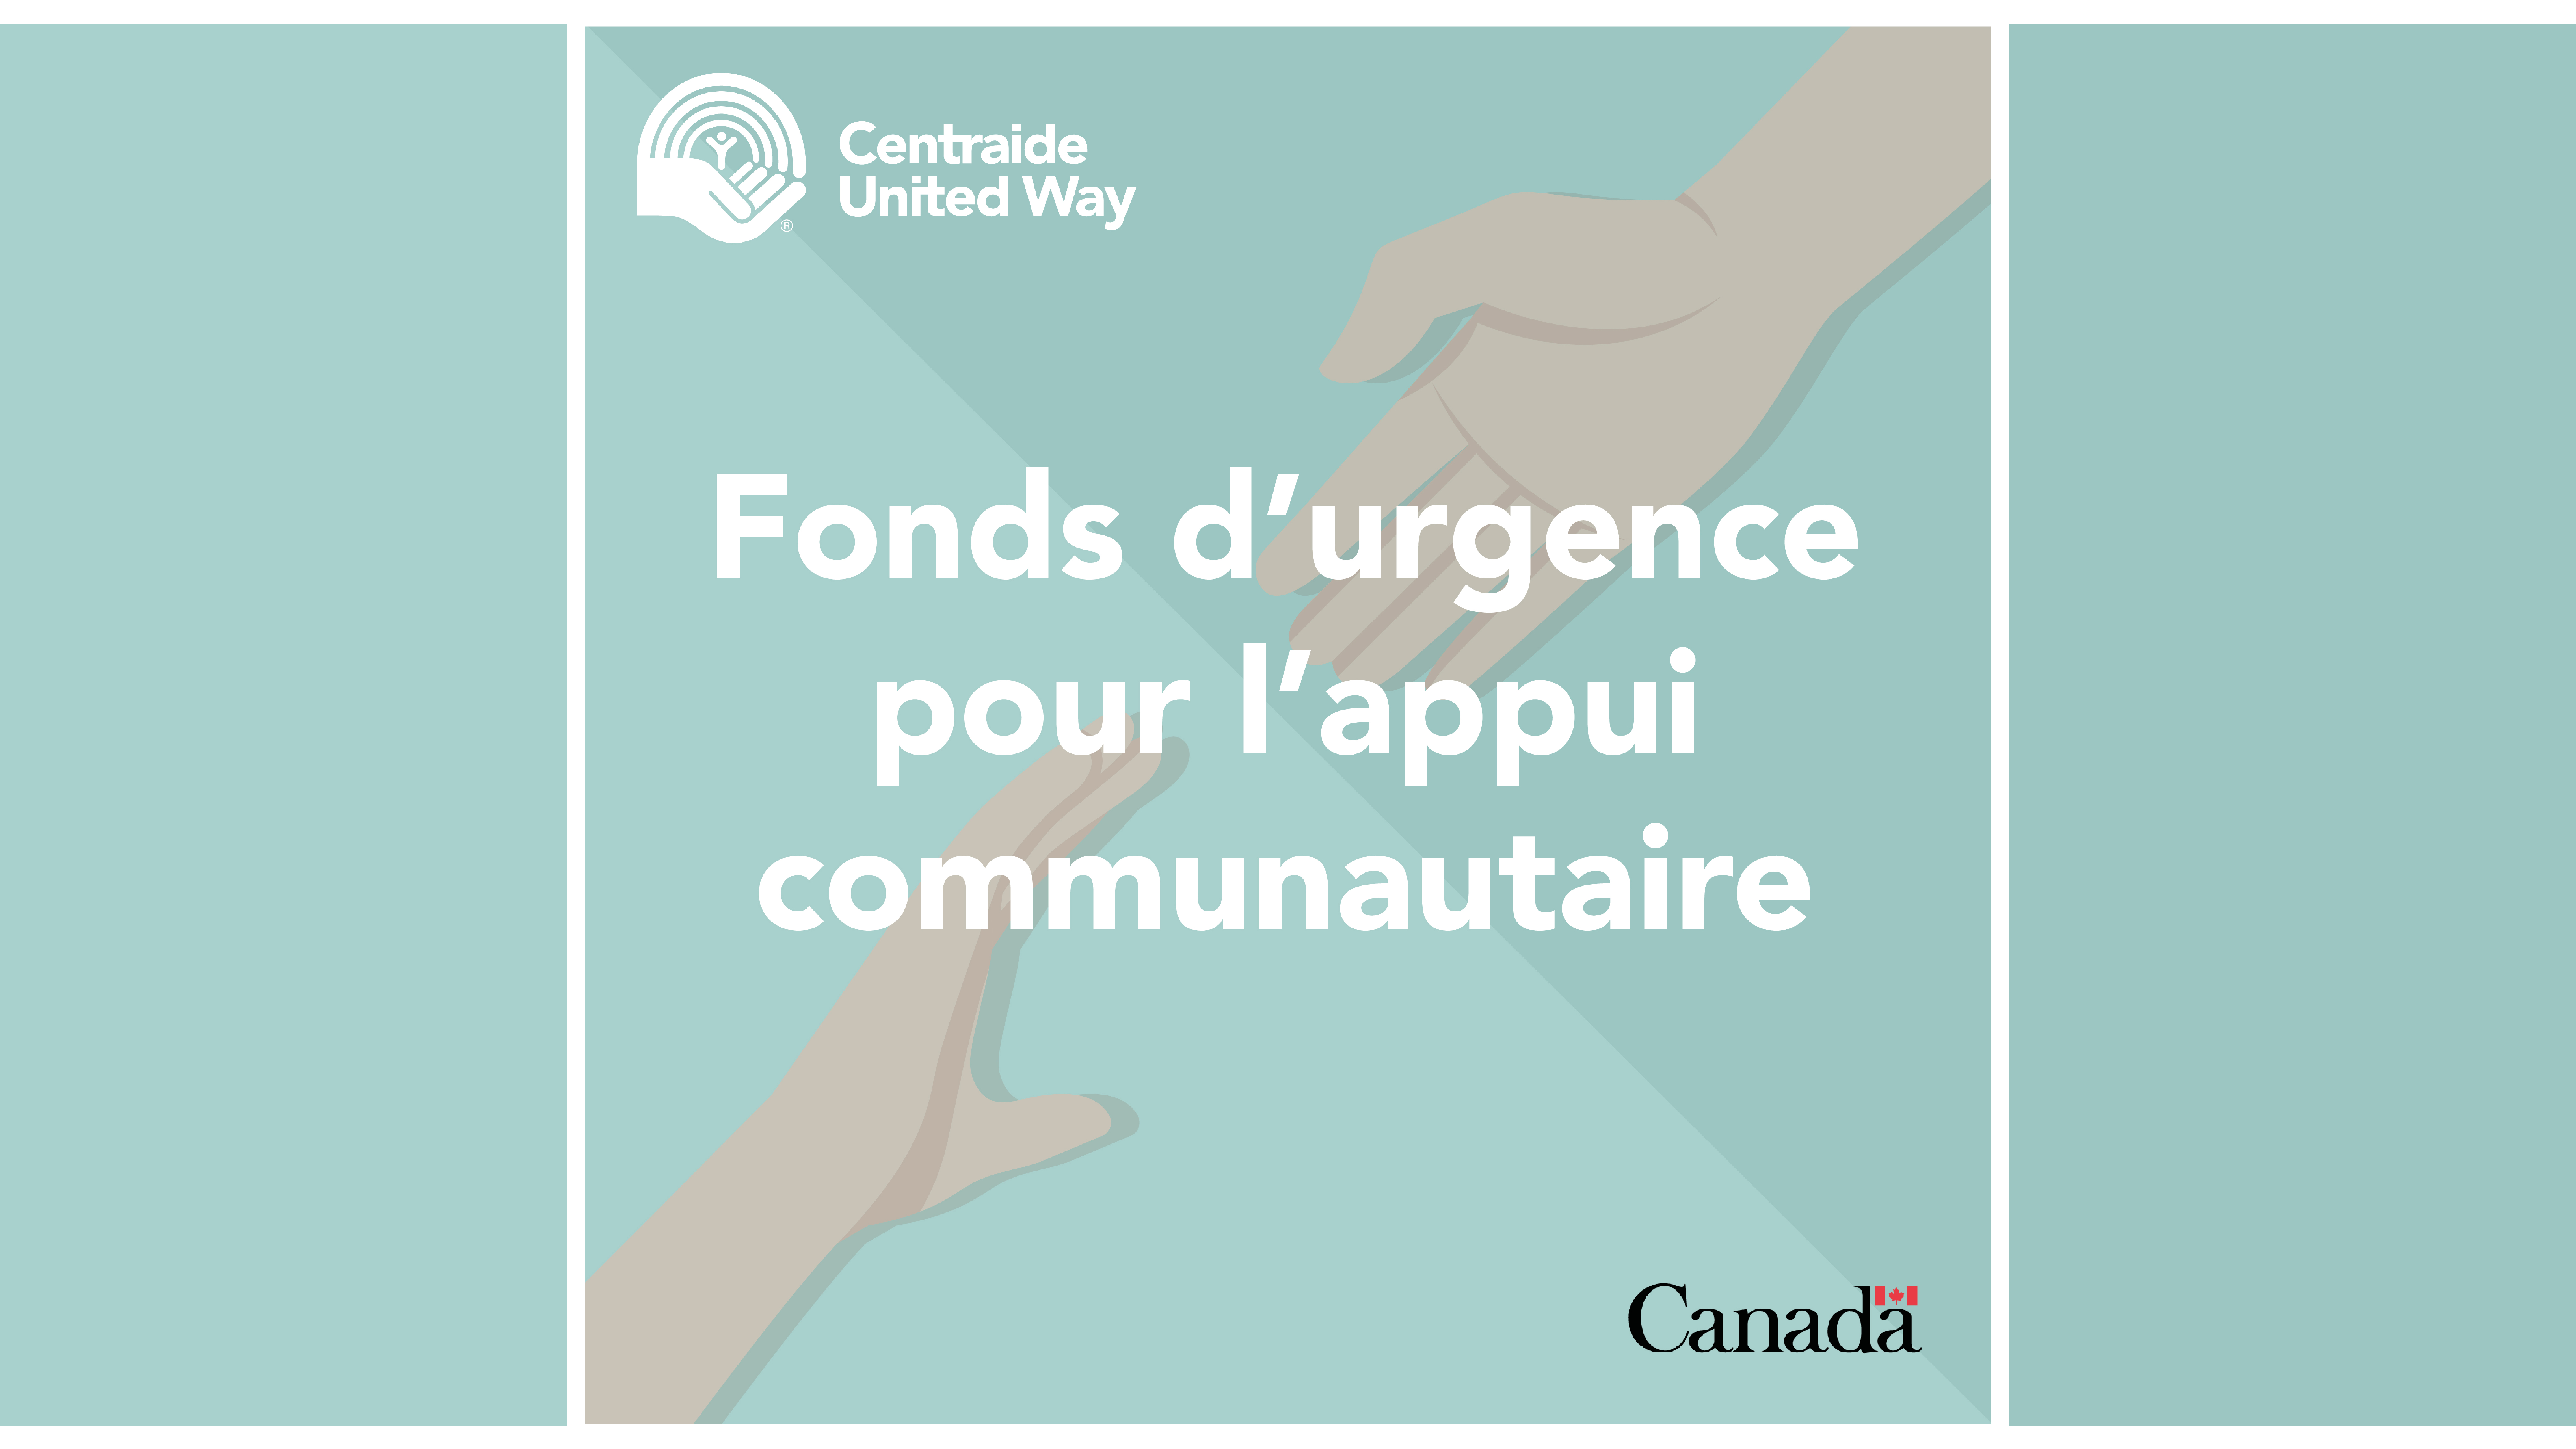 You are currently viewing Fonds d’urgence pour l’appui communautaire